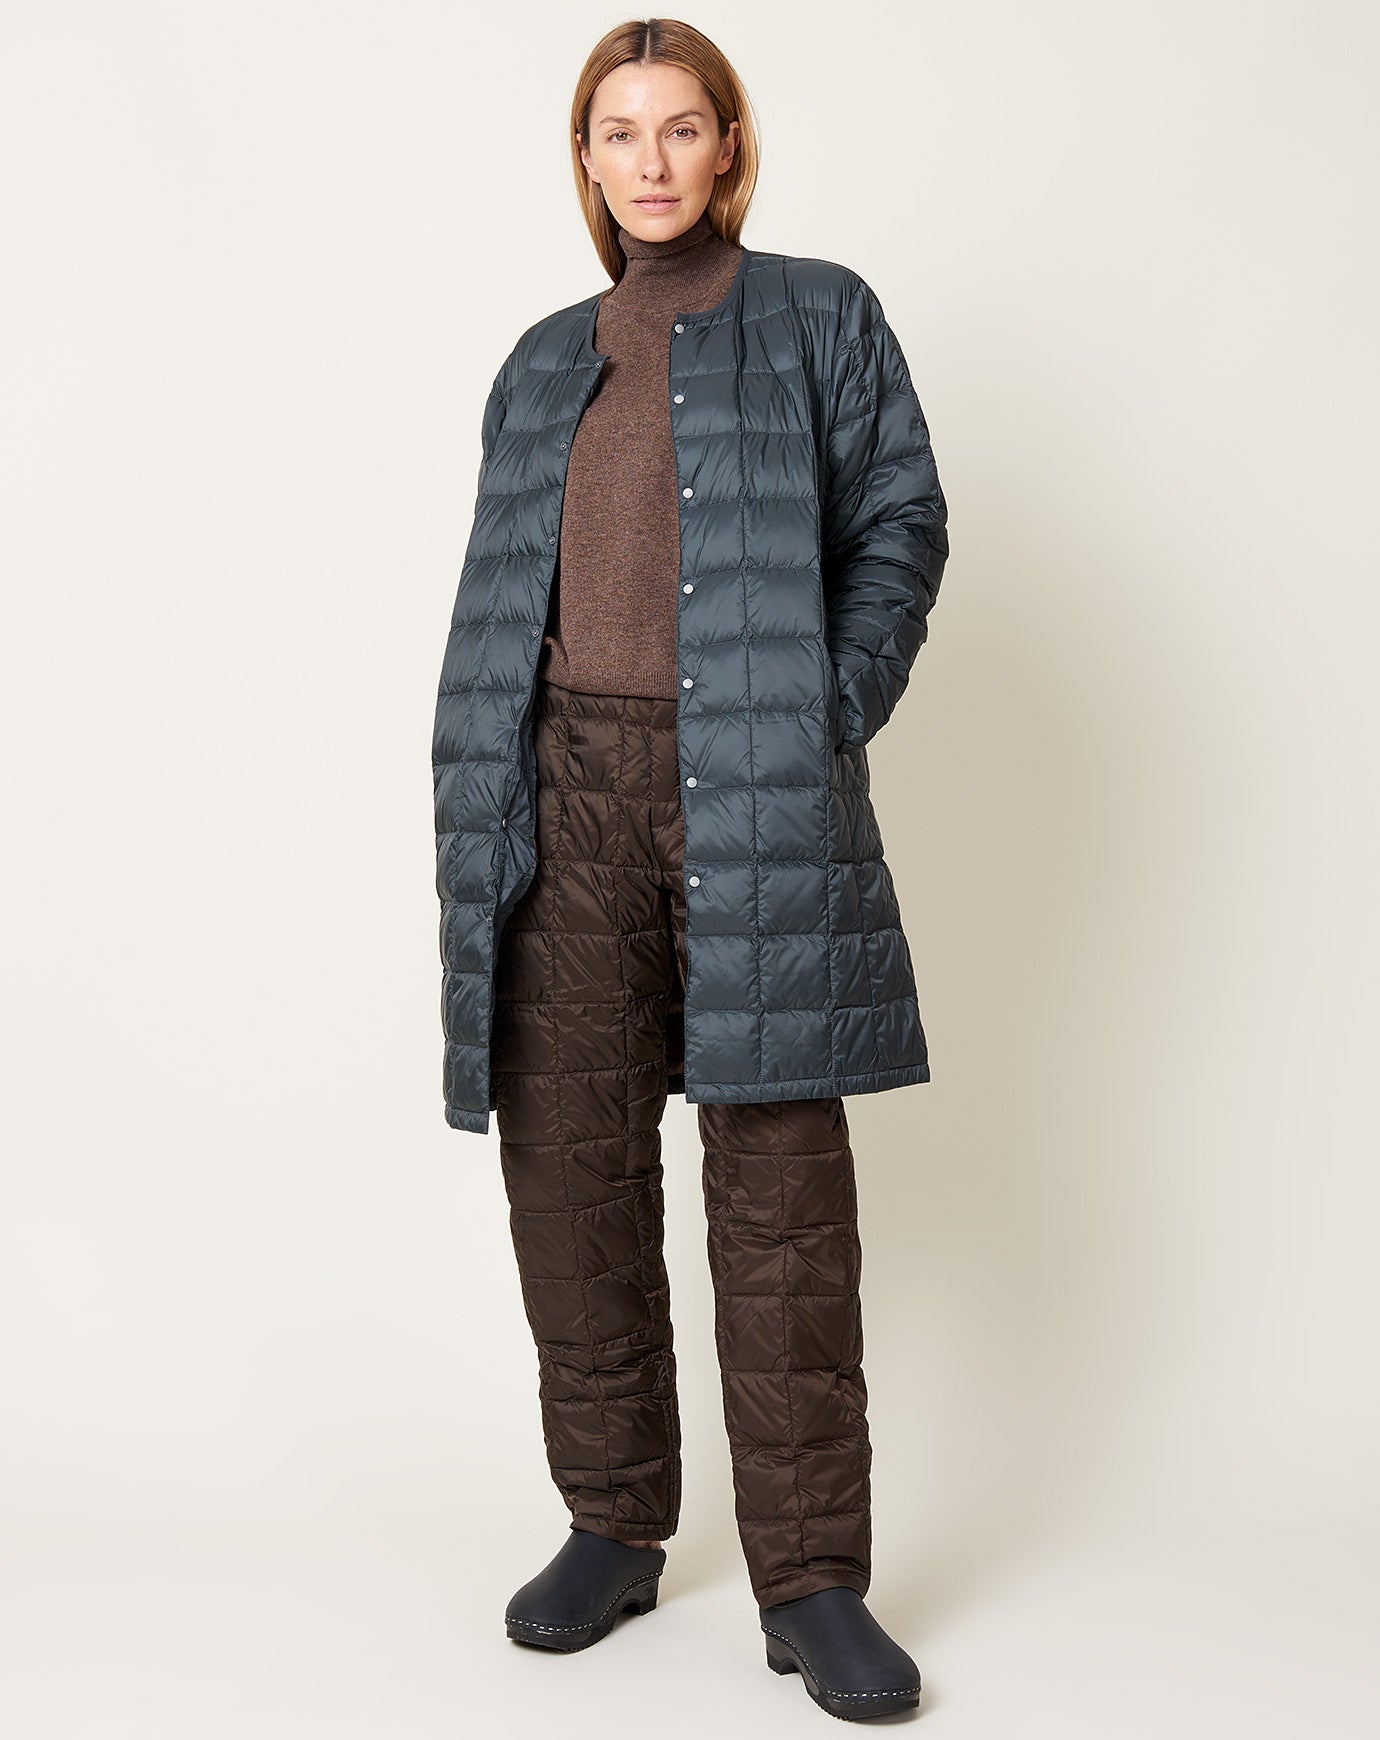 Taion Basic Over Size Crew Neck Button Long Down Jacket in Dark Charcoal and Chocolate